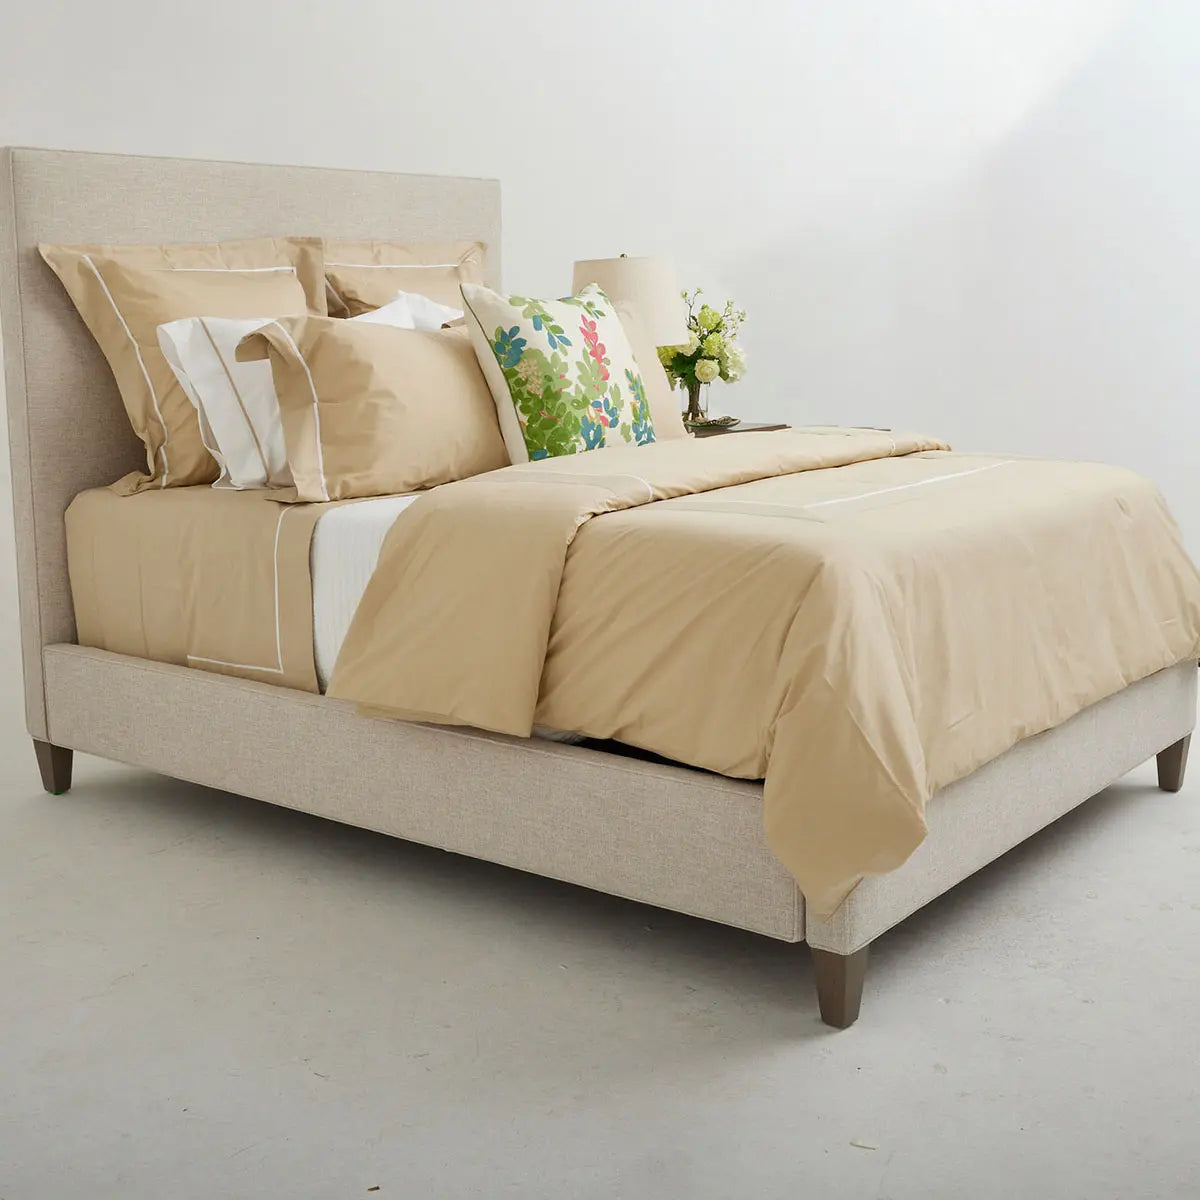 Gracious Home Bali Bedding Collection - Sand on a bed